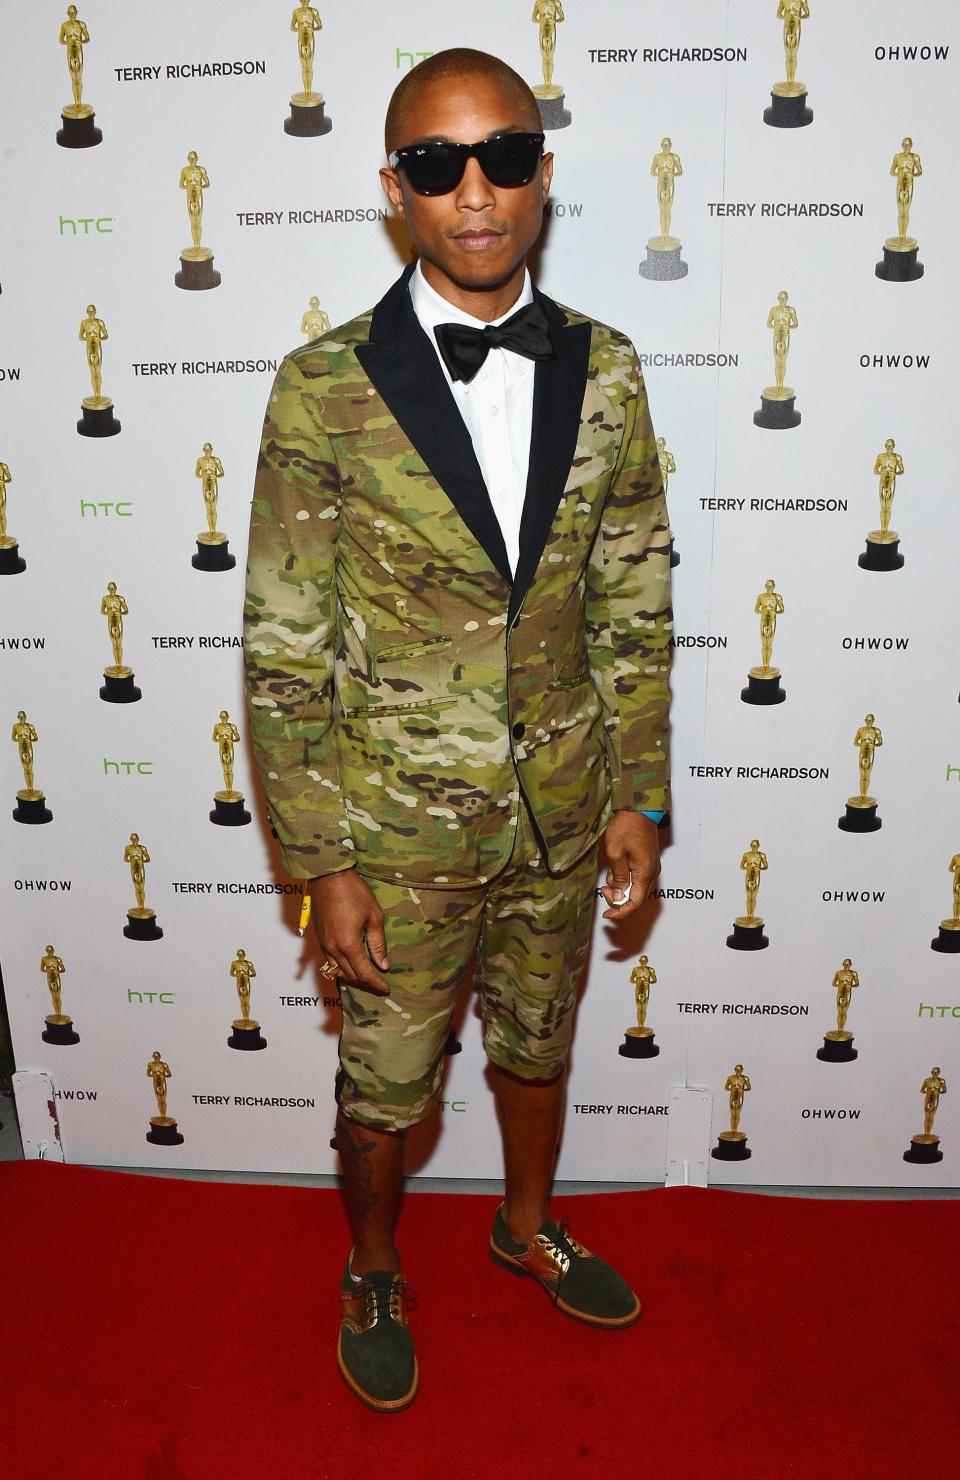 Pharrell Williams attends the OHWOW & HTC celebration of the release of "Terrywood" with Terry Richardson at The Standard Hotel & Spa on December 7, 2012 in Miami Beach, Florida.